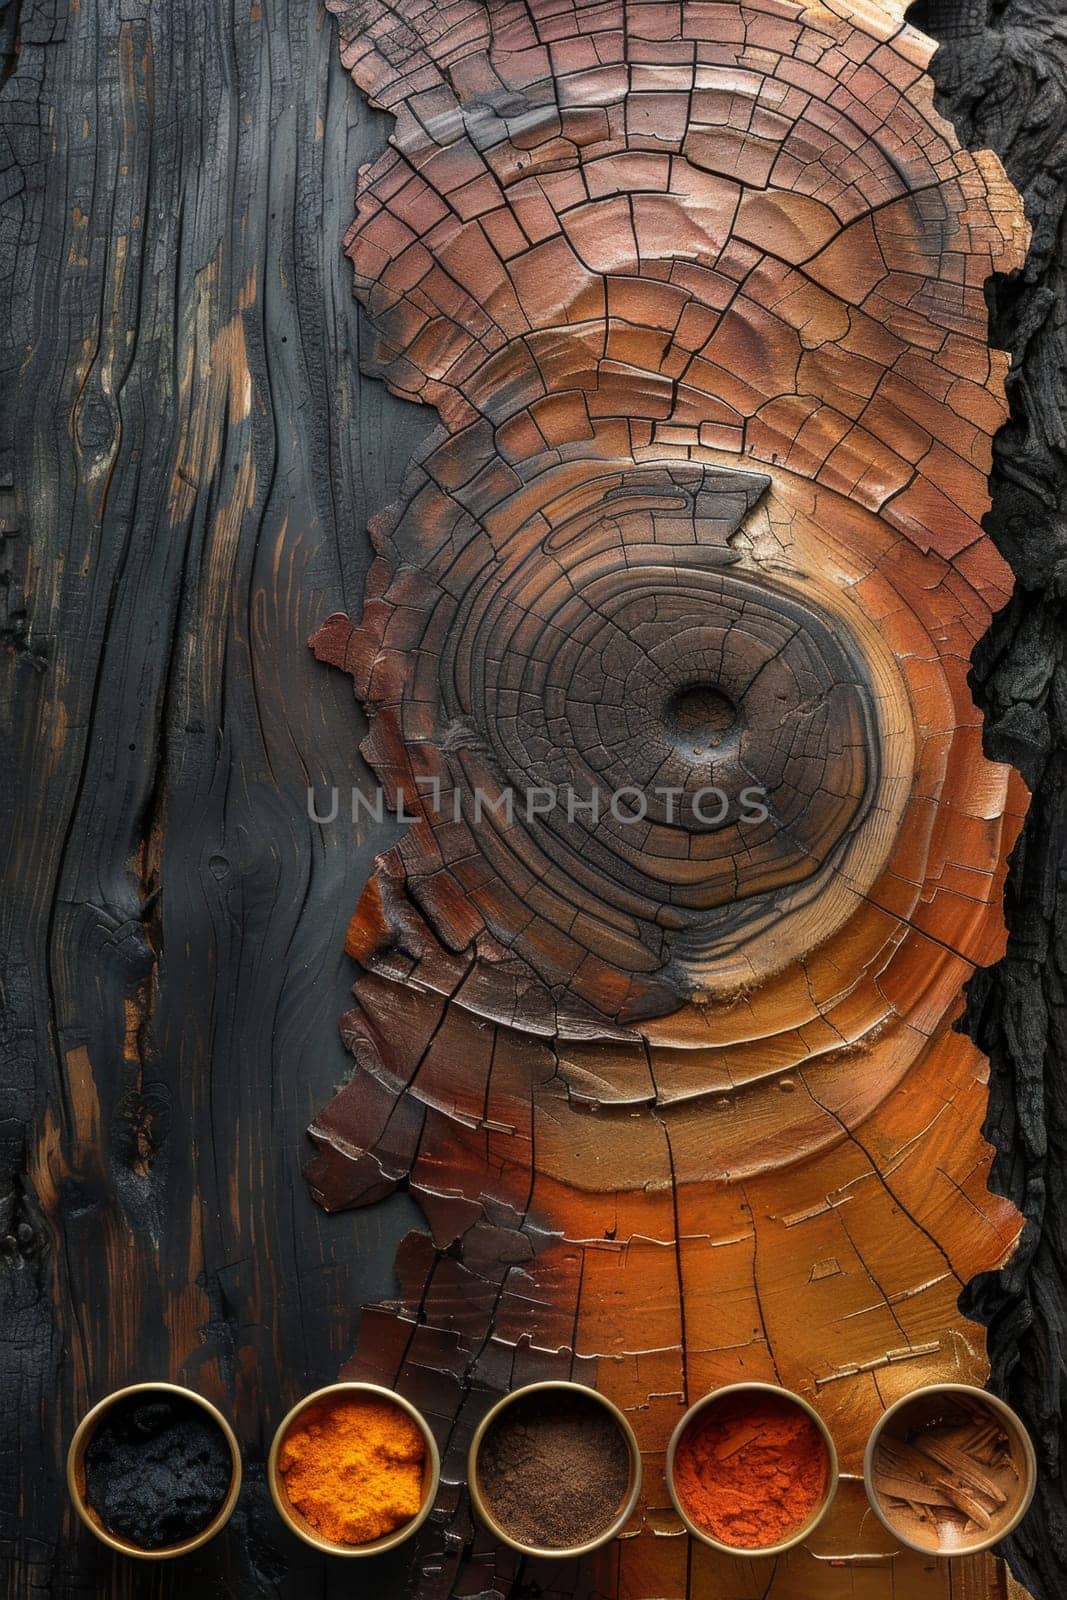 multicolored abstract background with a grunge wood texture. Wood fiber background.